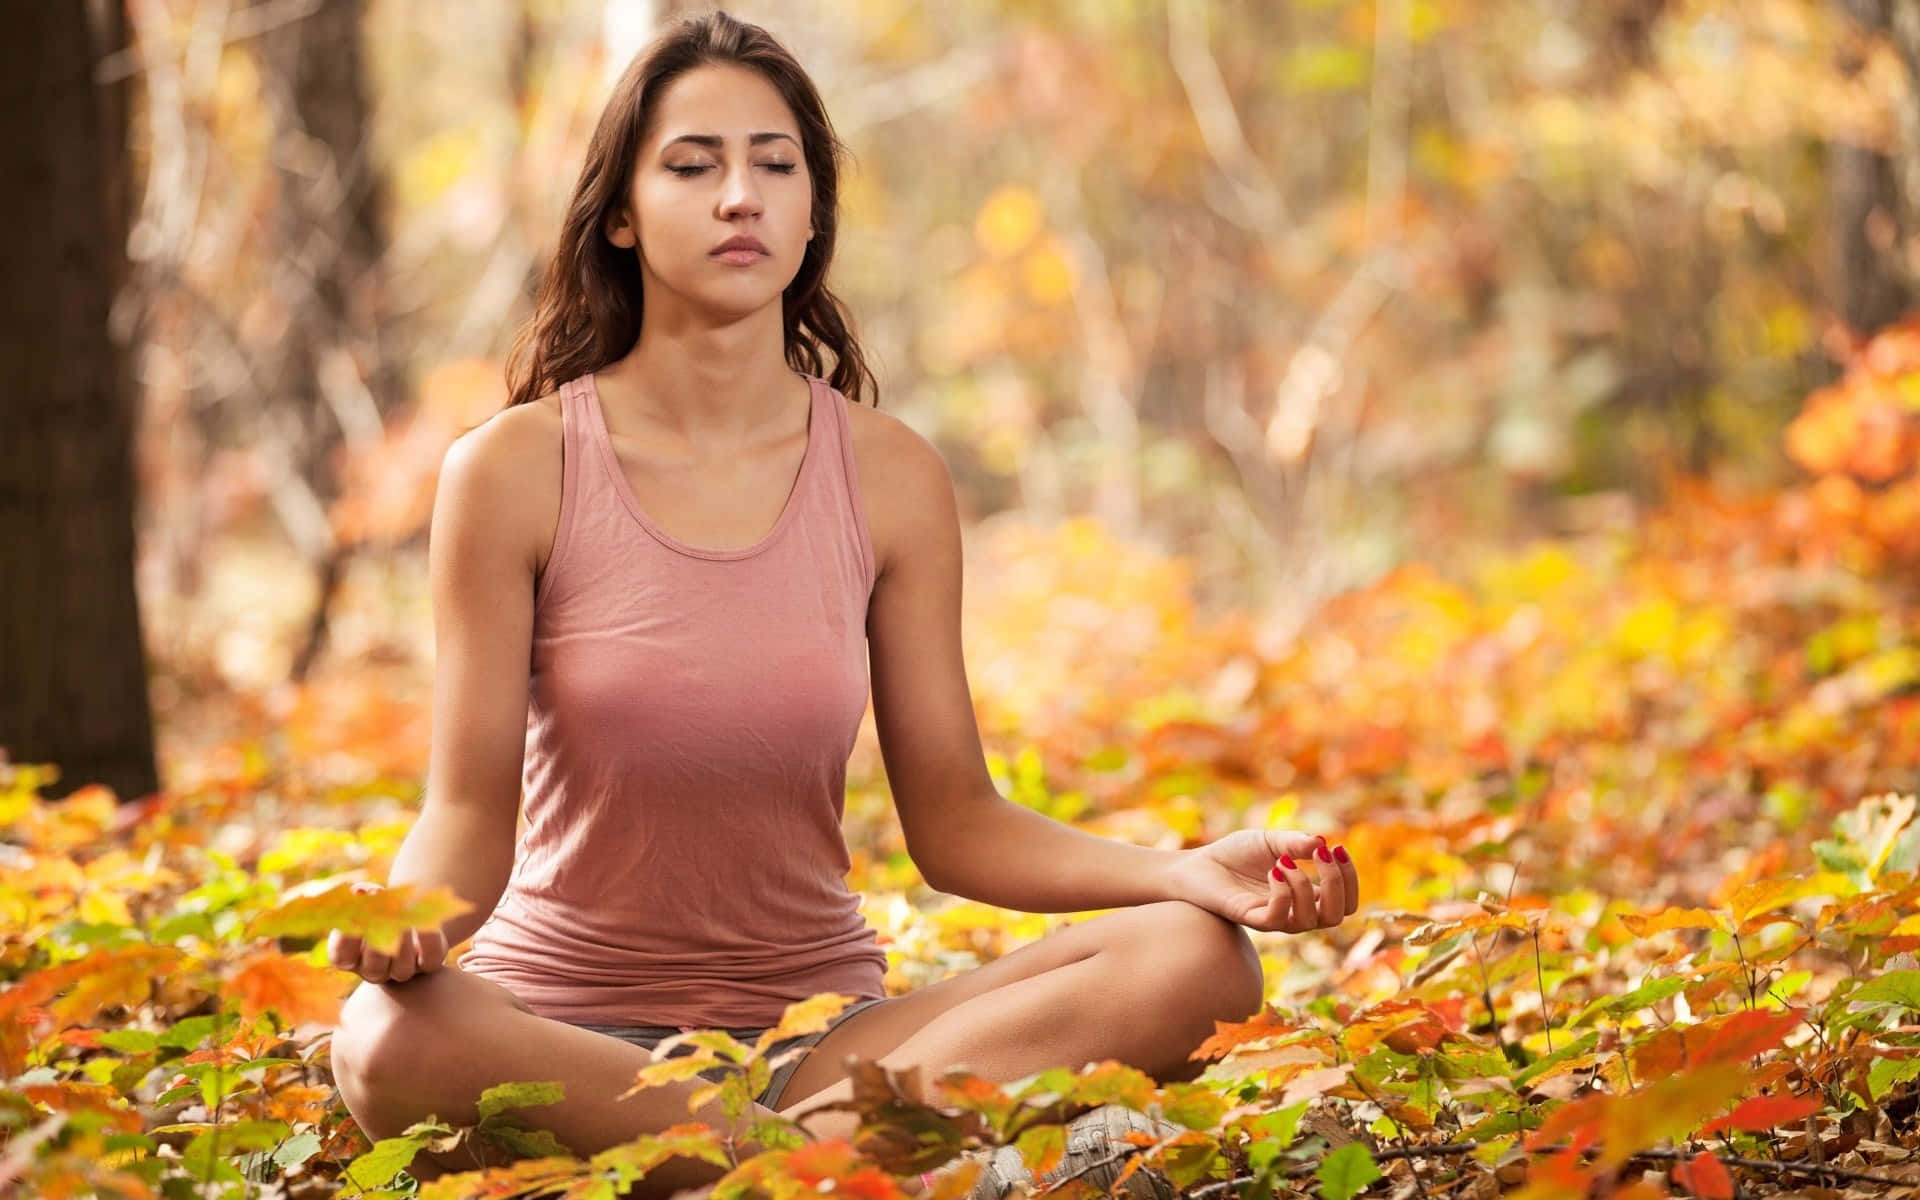 Indian Woman Doing Yoga In Autumn Landscape Wallpaper